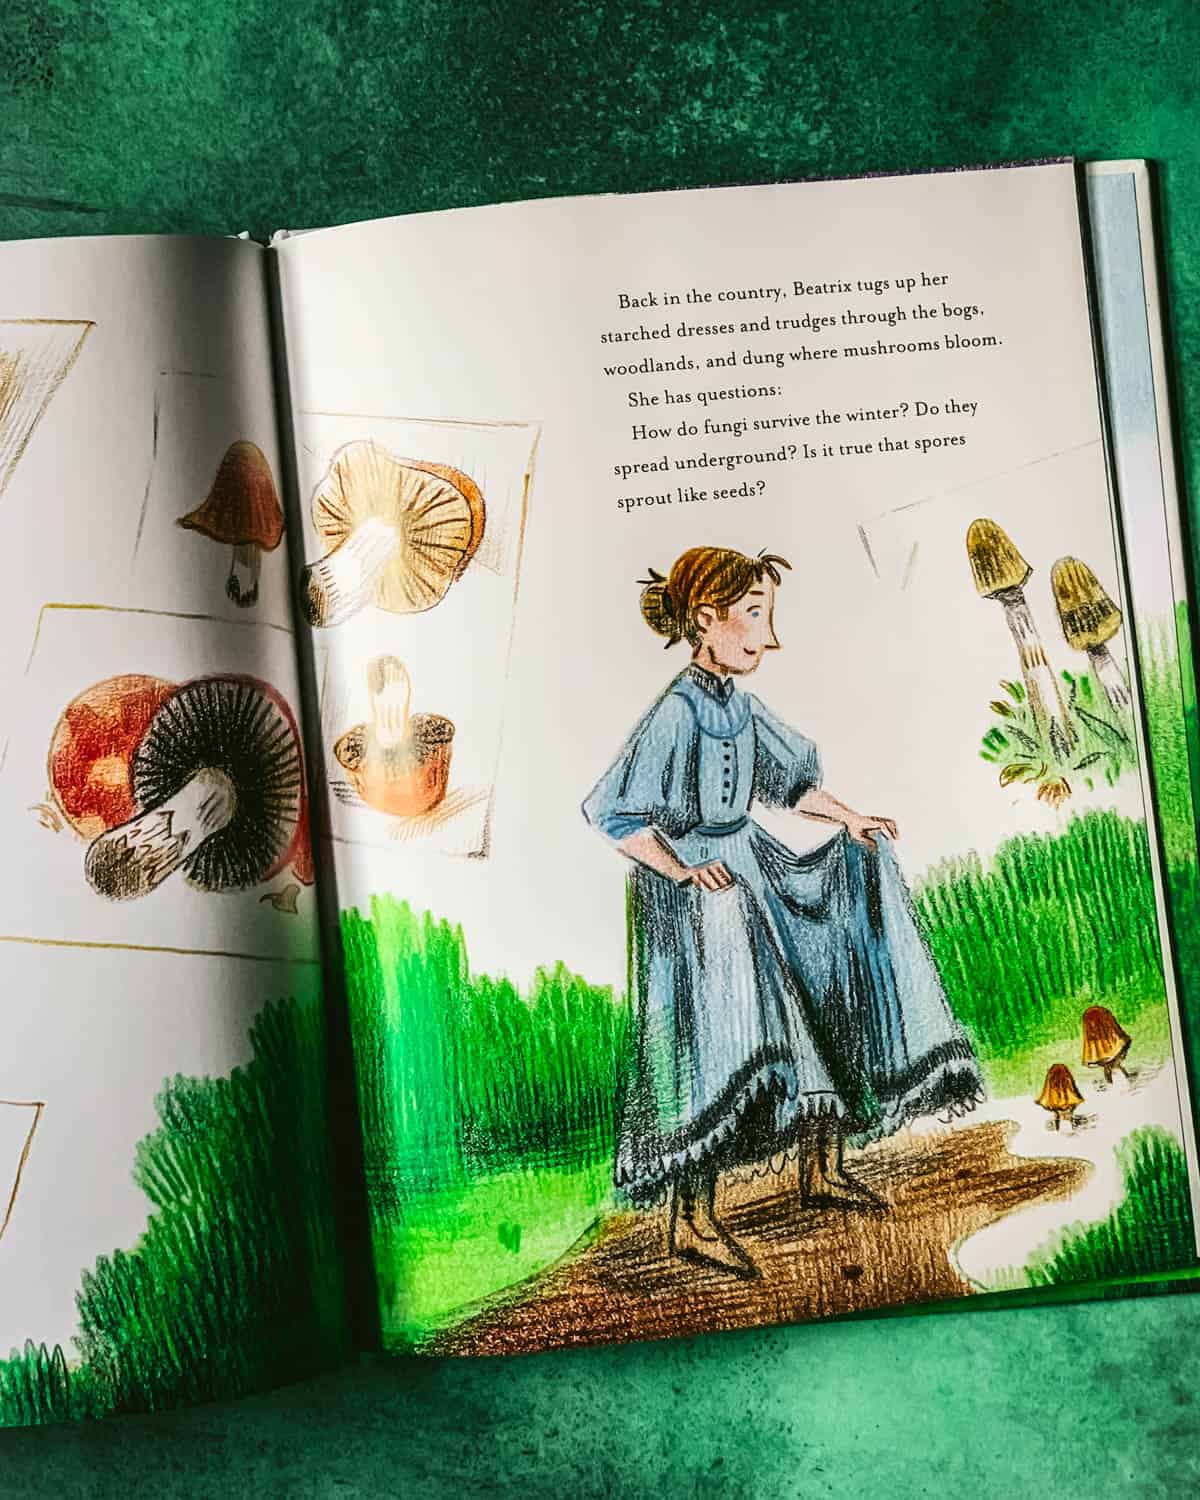 beatrix potter scientist opened up to a page with her looking at mushrooms